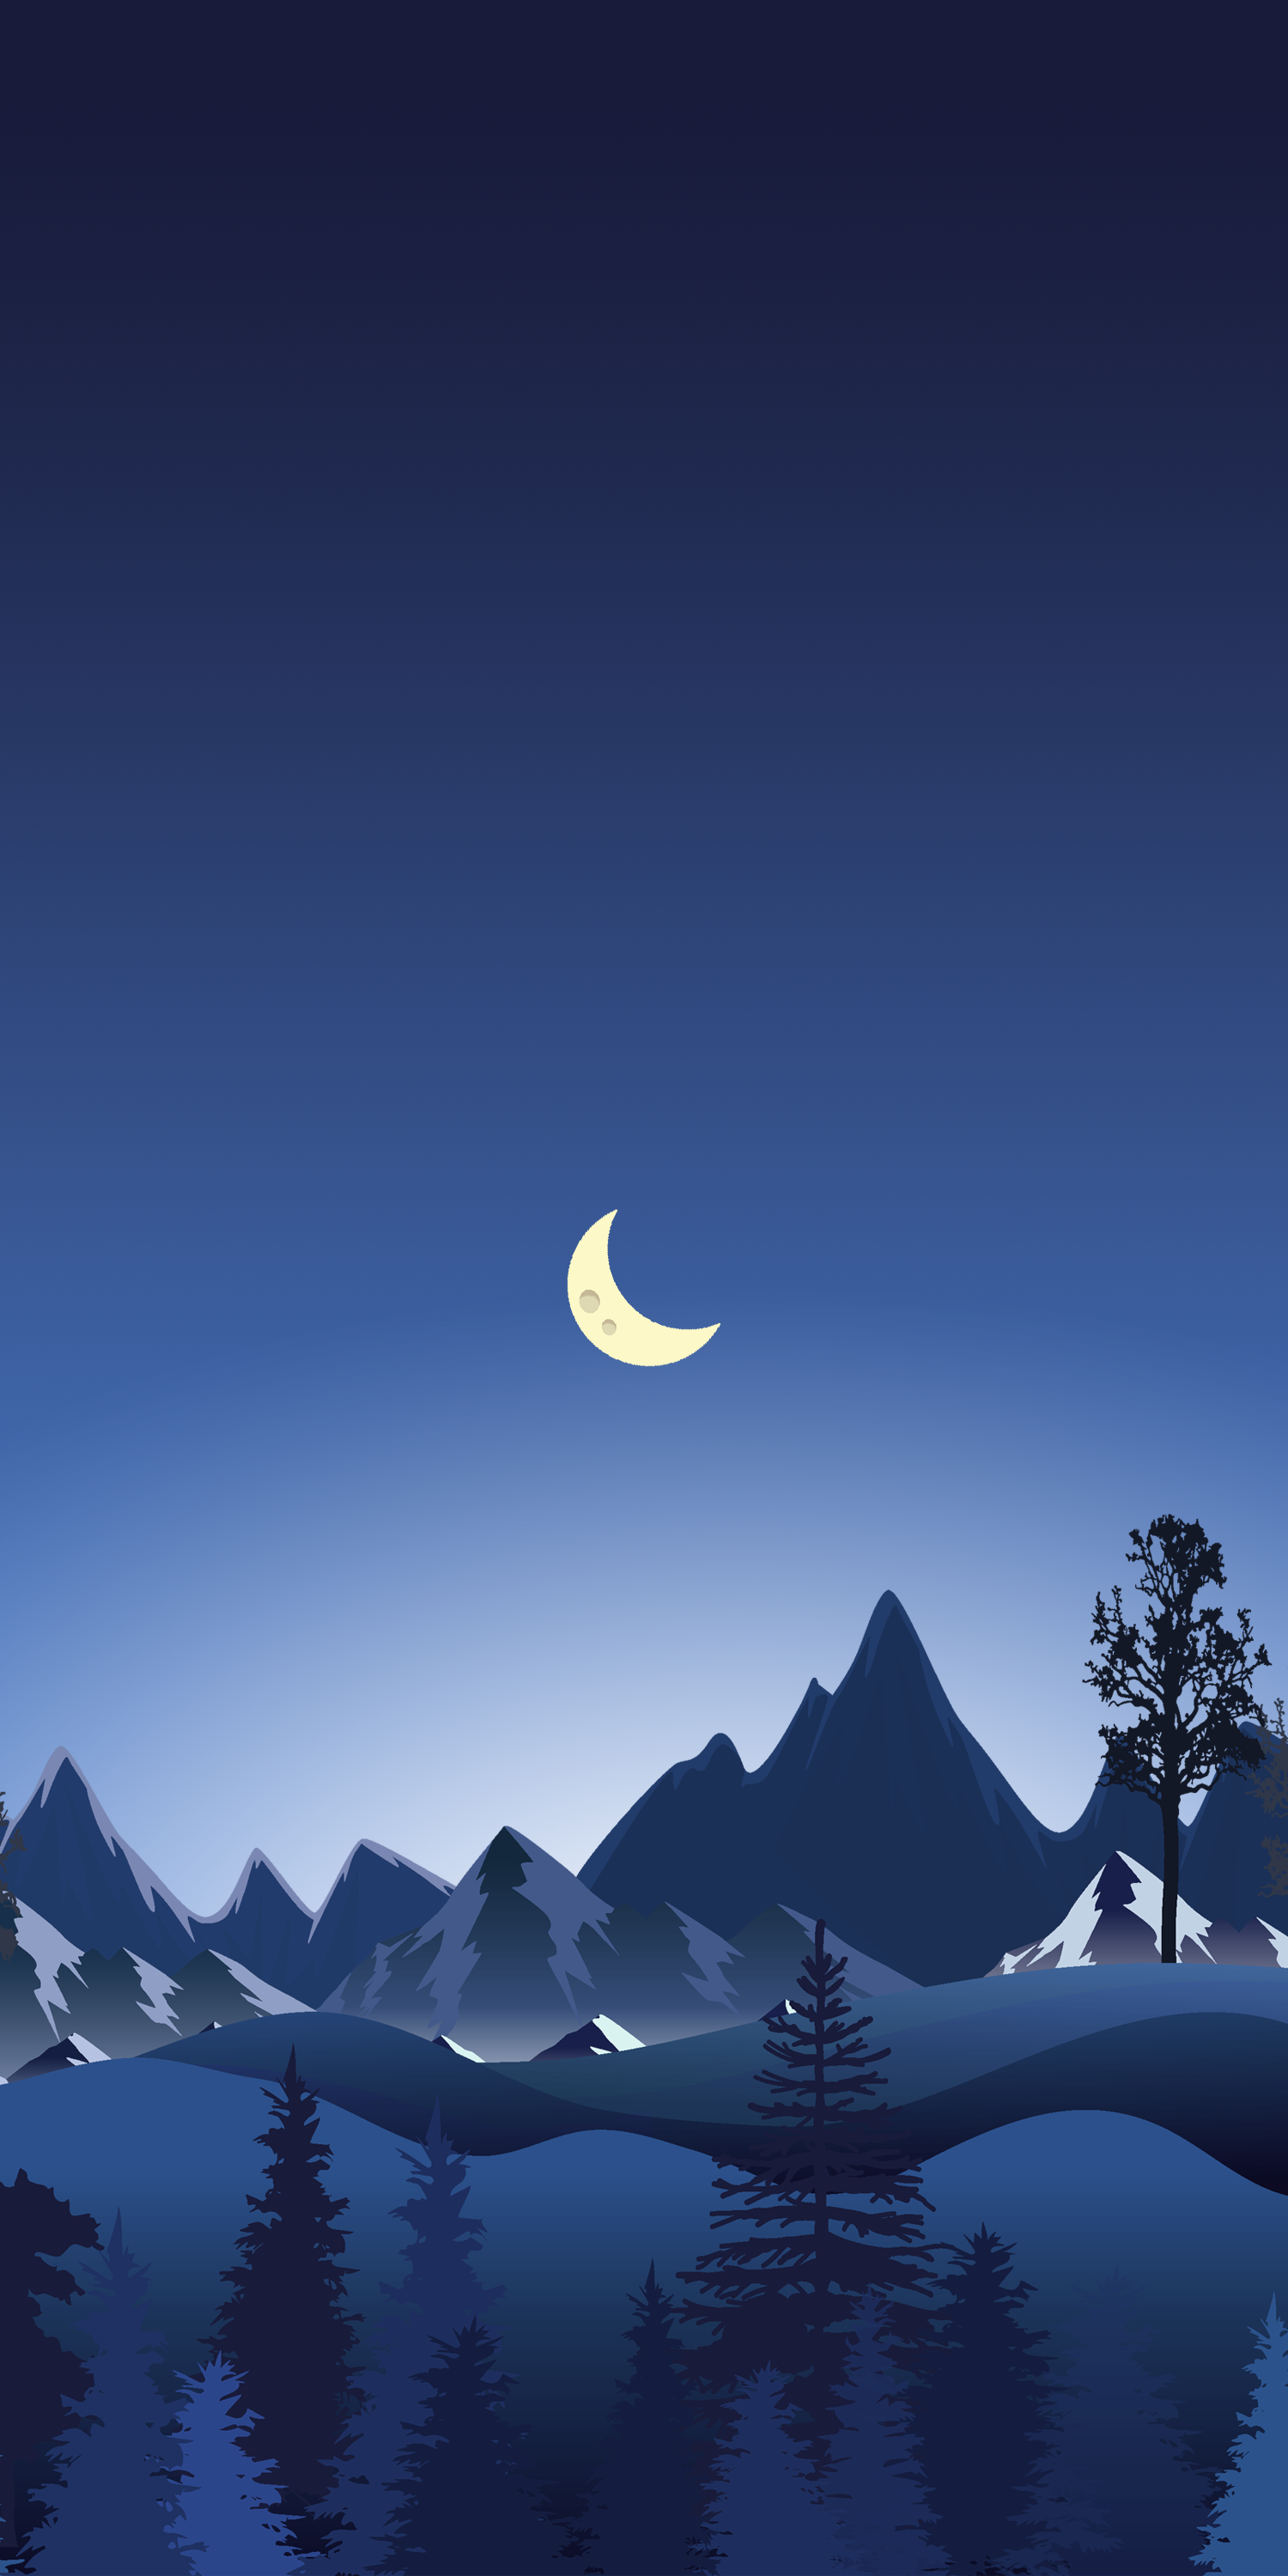 Snowy Mountain Background Iphone Wallpaper Ongliong11.png 500×000 Pixels. Scenery Wallpaper, Art Wallpaper Iphone, Artistic Wallpaper